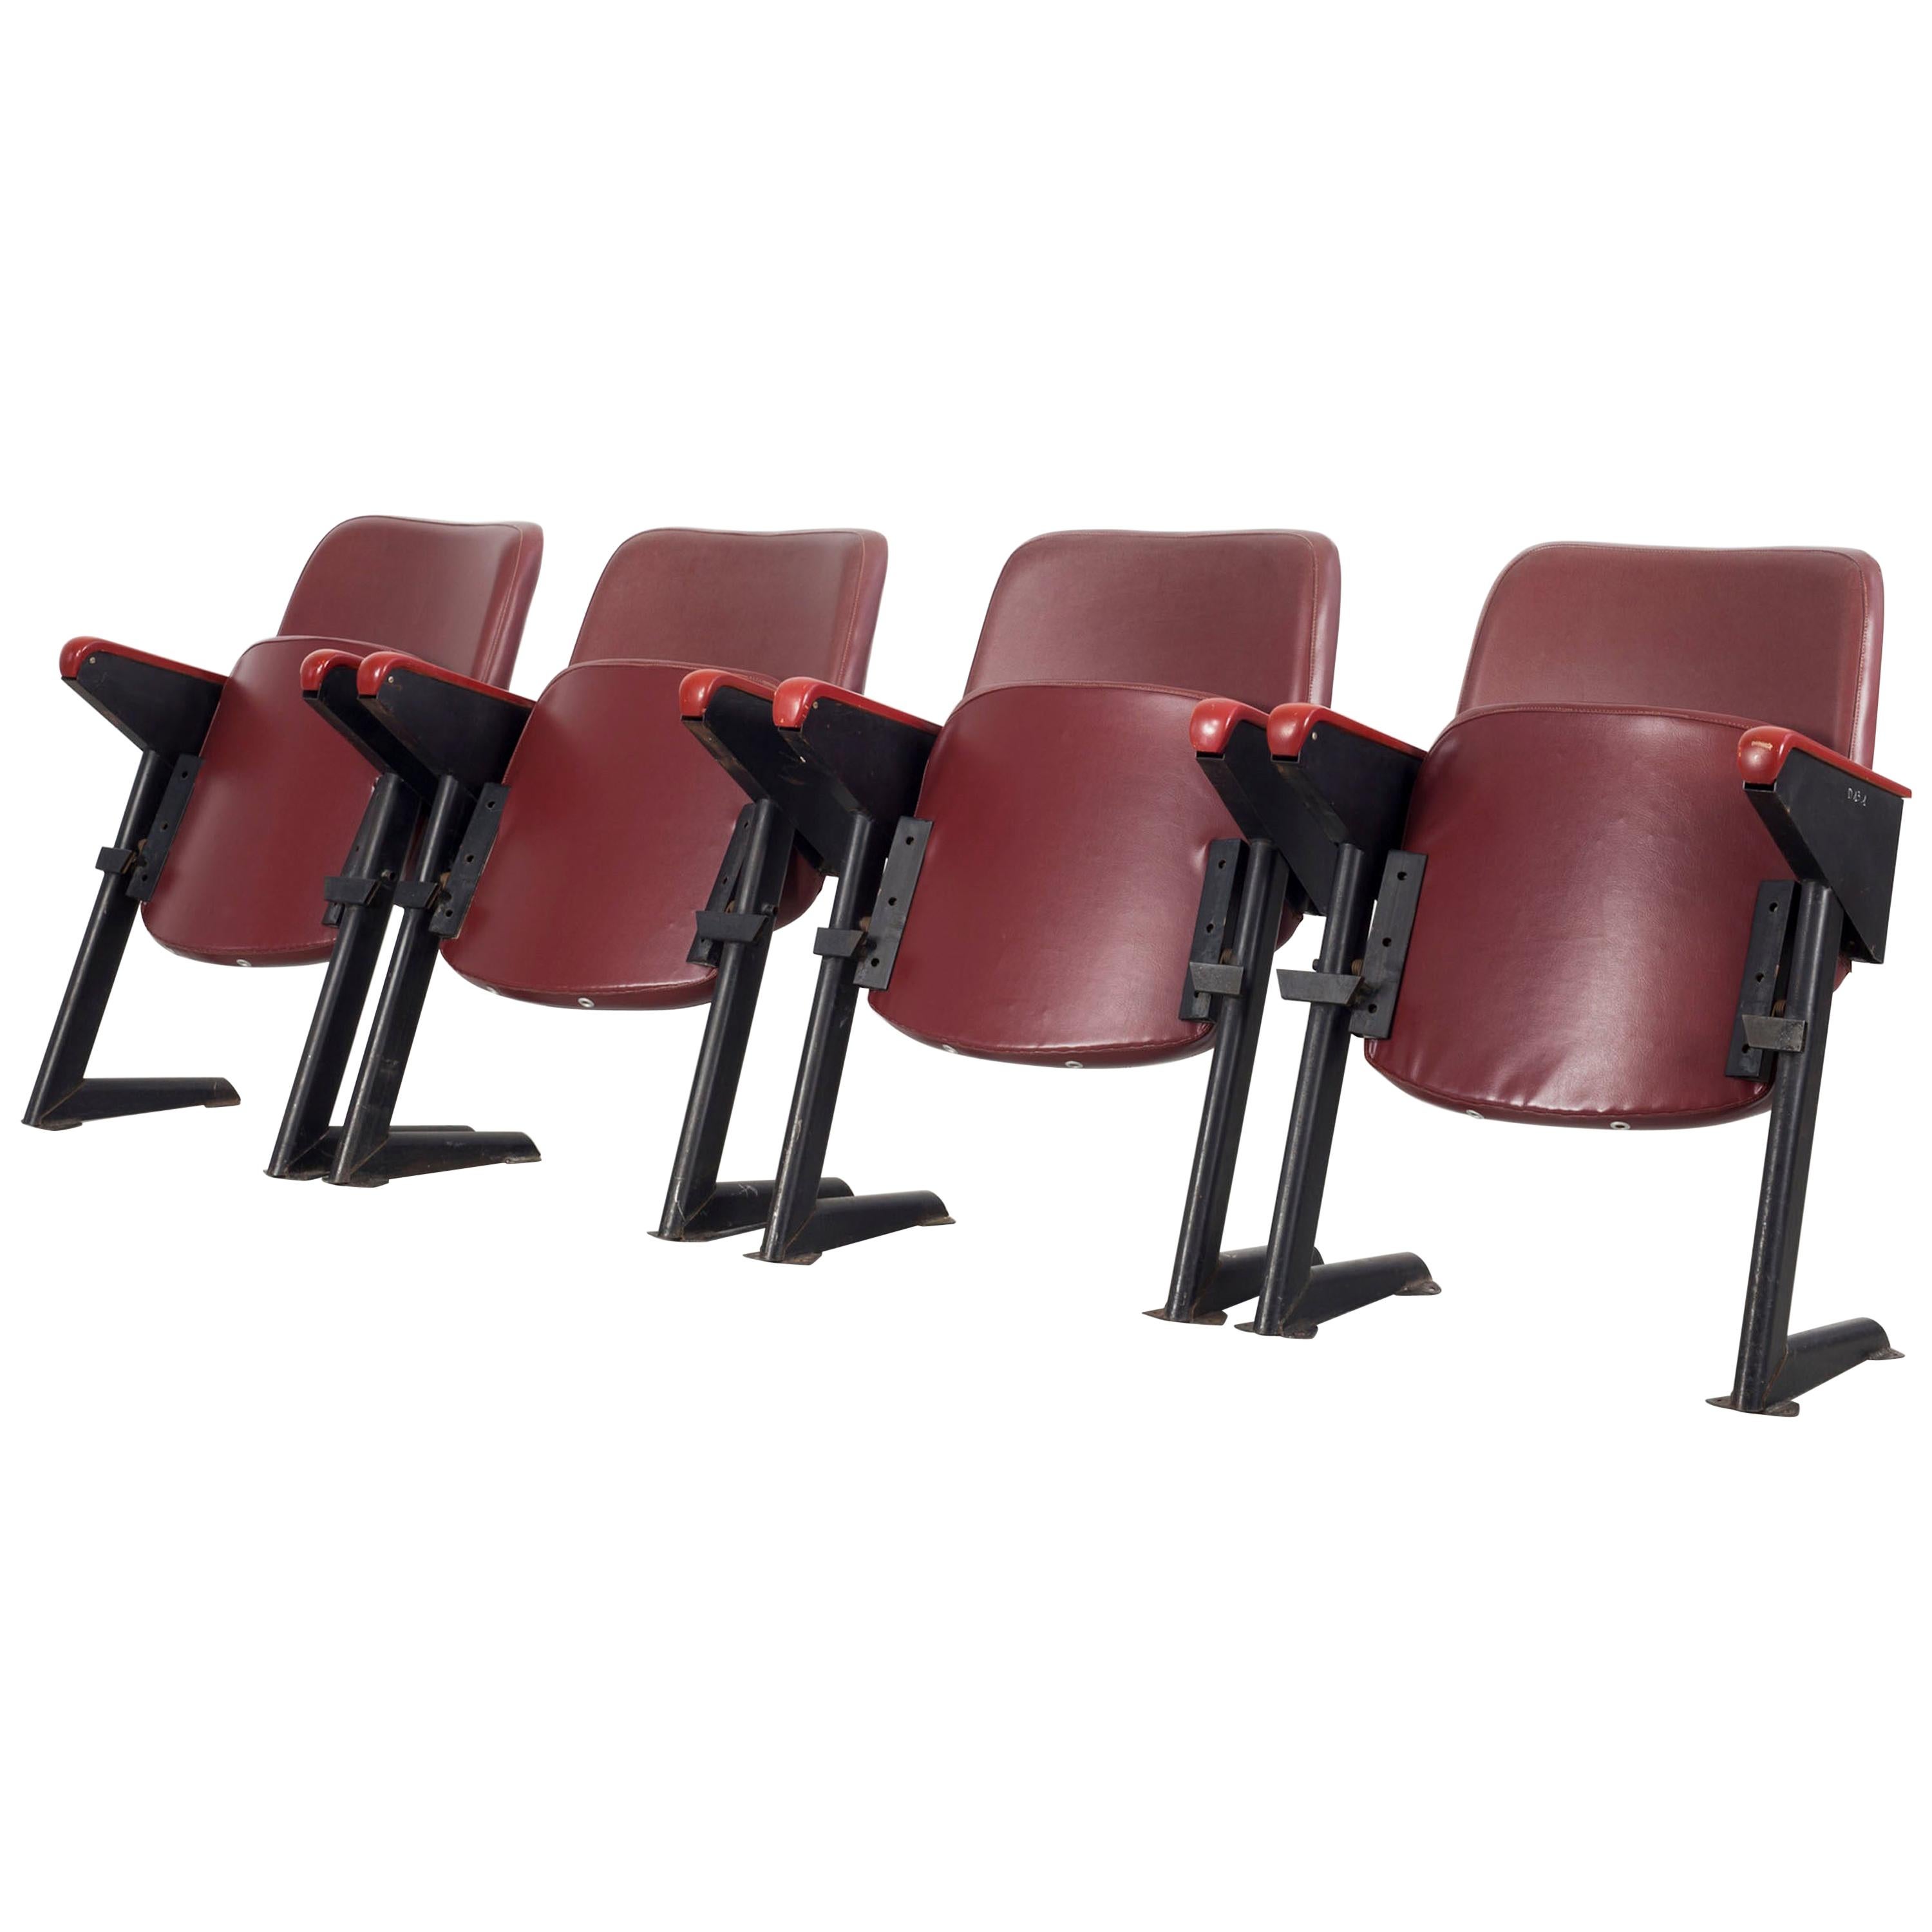 Set of 4 LV8 Cinema, Theater Chairs with Synthetic Leather Upholstery For Sale